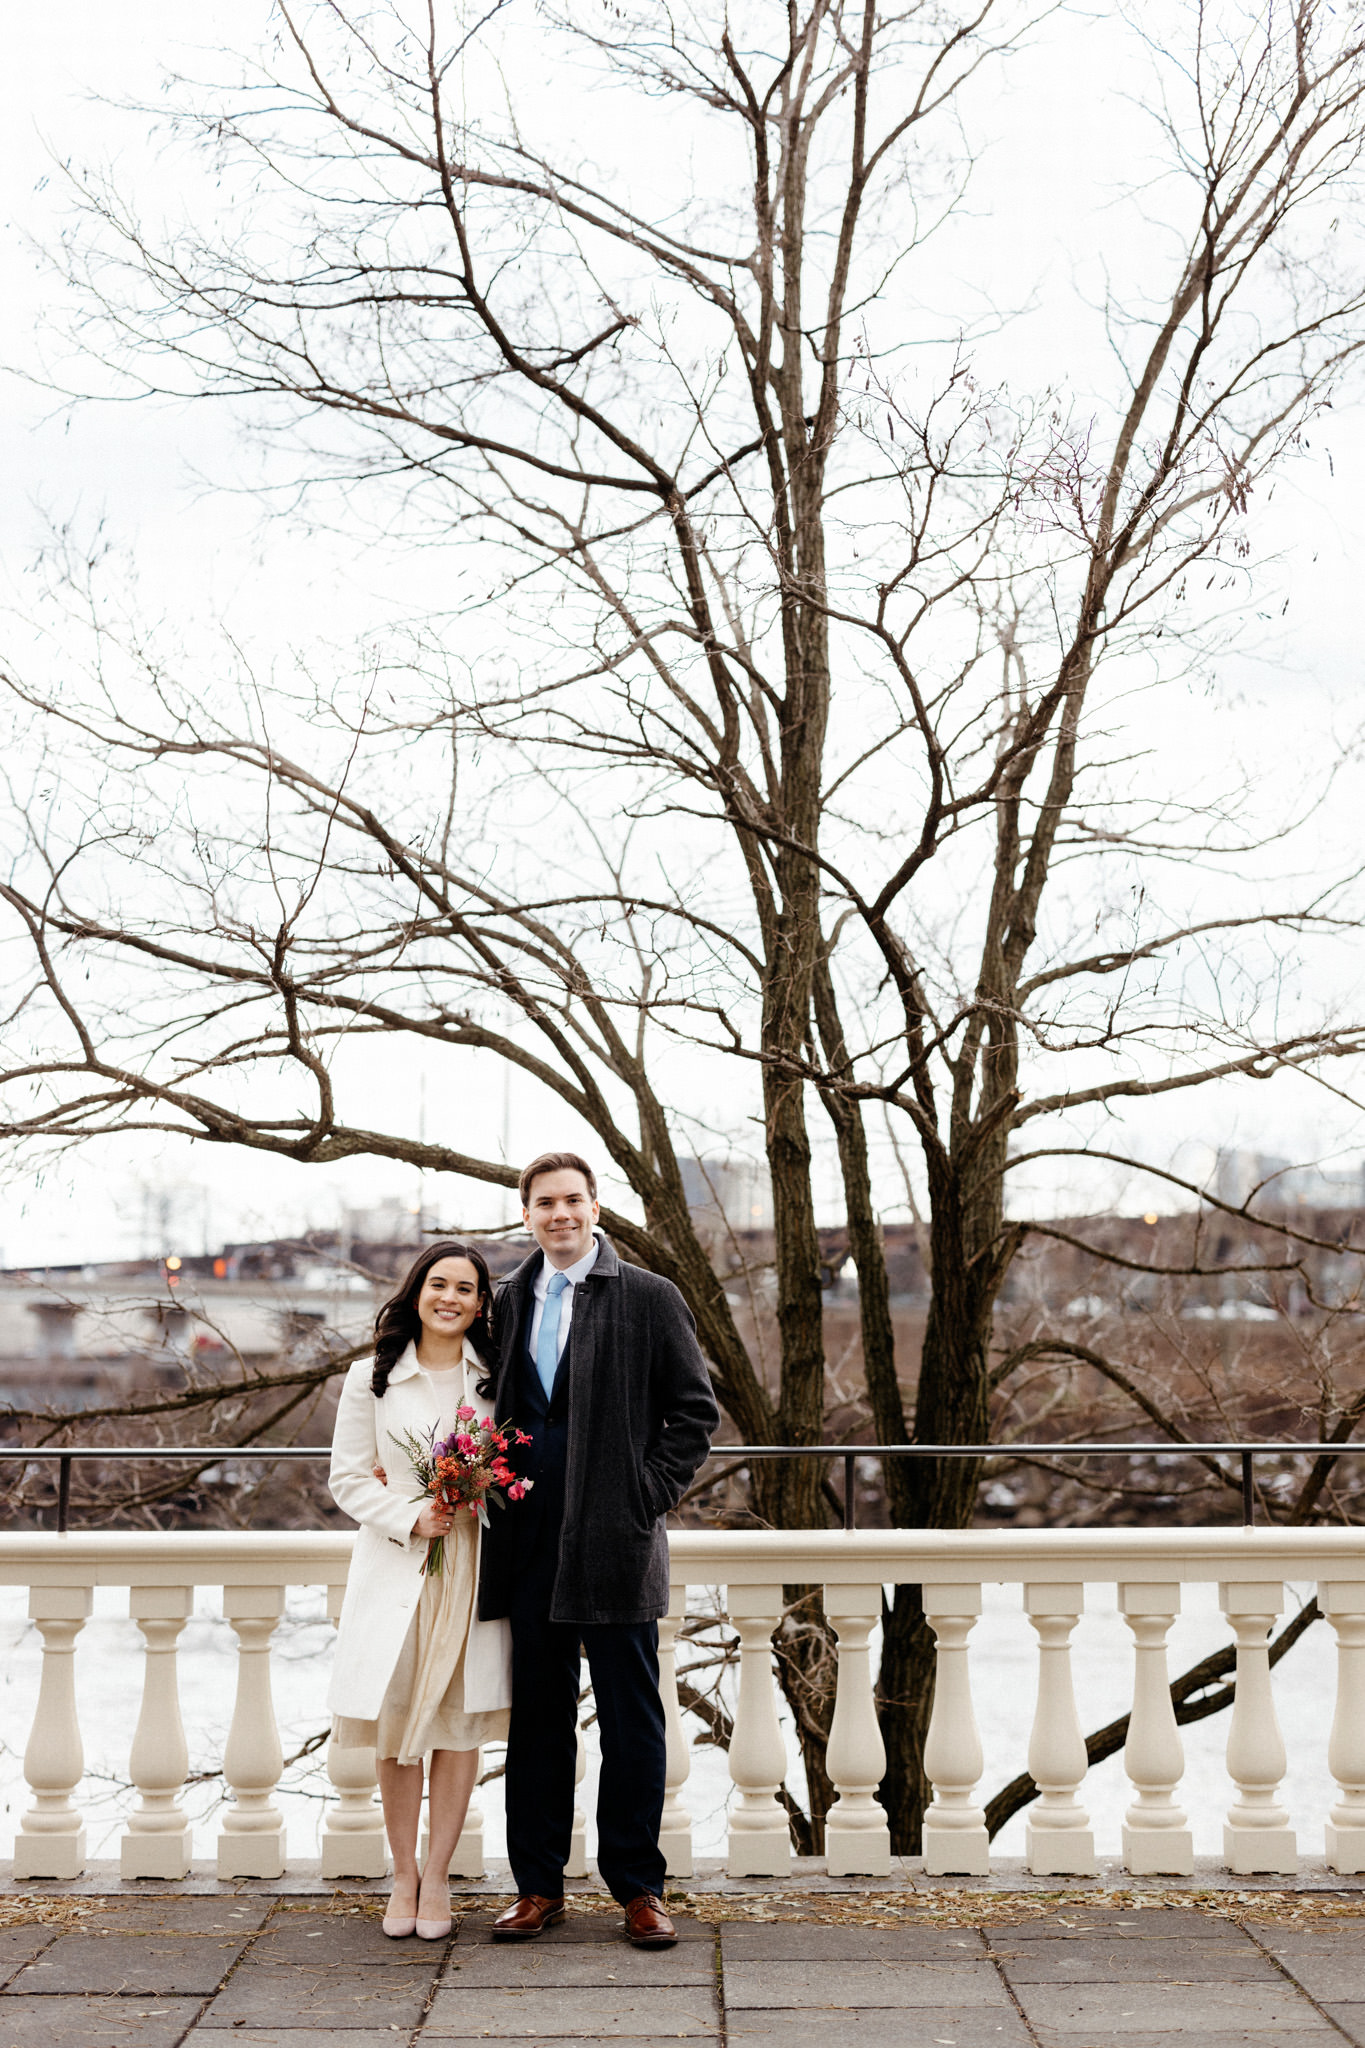 A wedding portrait of the newly-weds with a barren tree in the background. Winter wedding venues image by Jenny Fu Studio